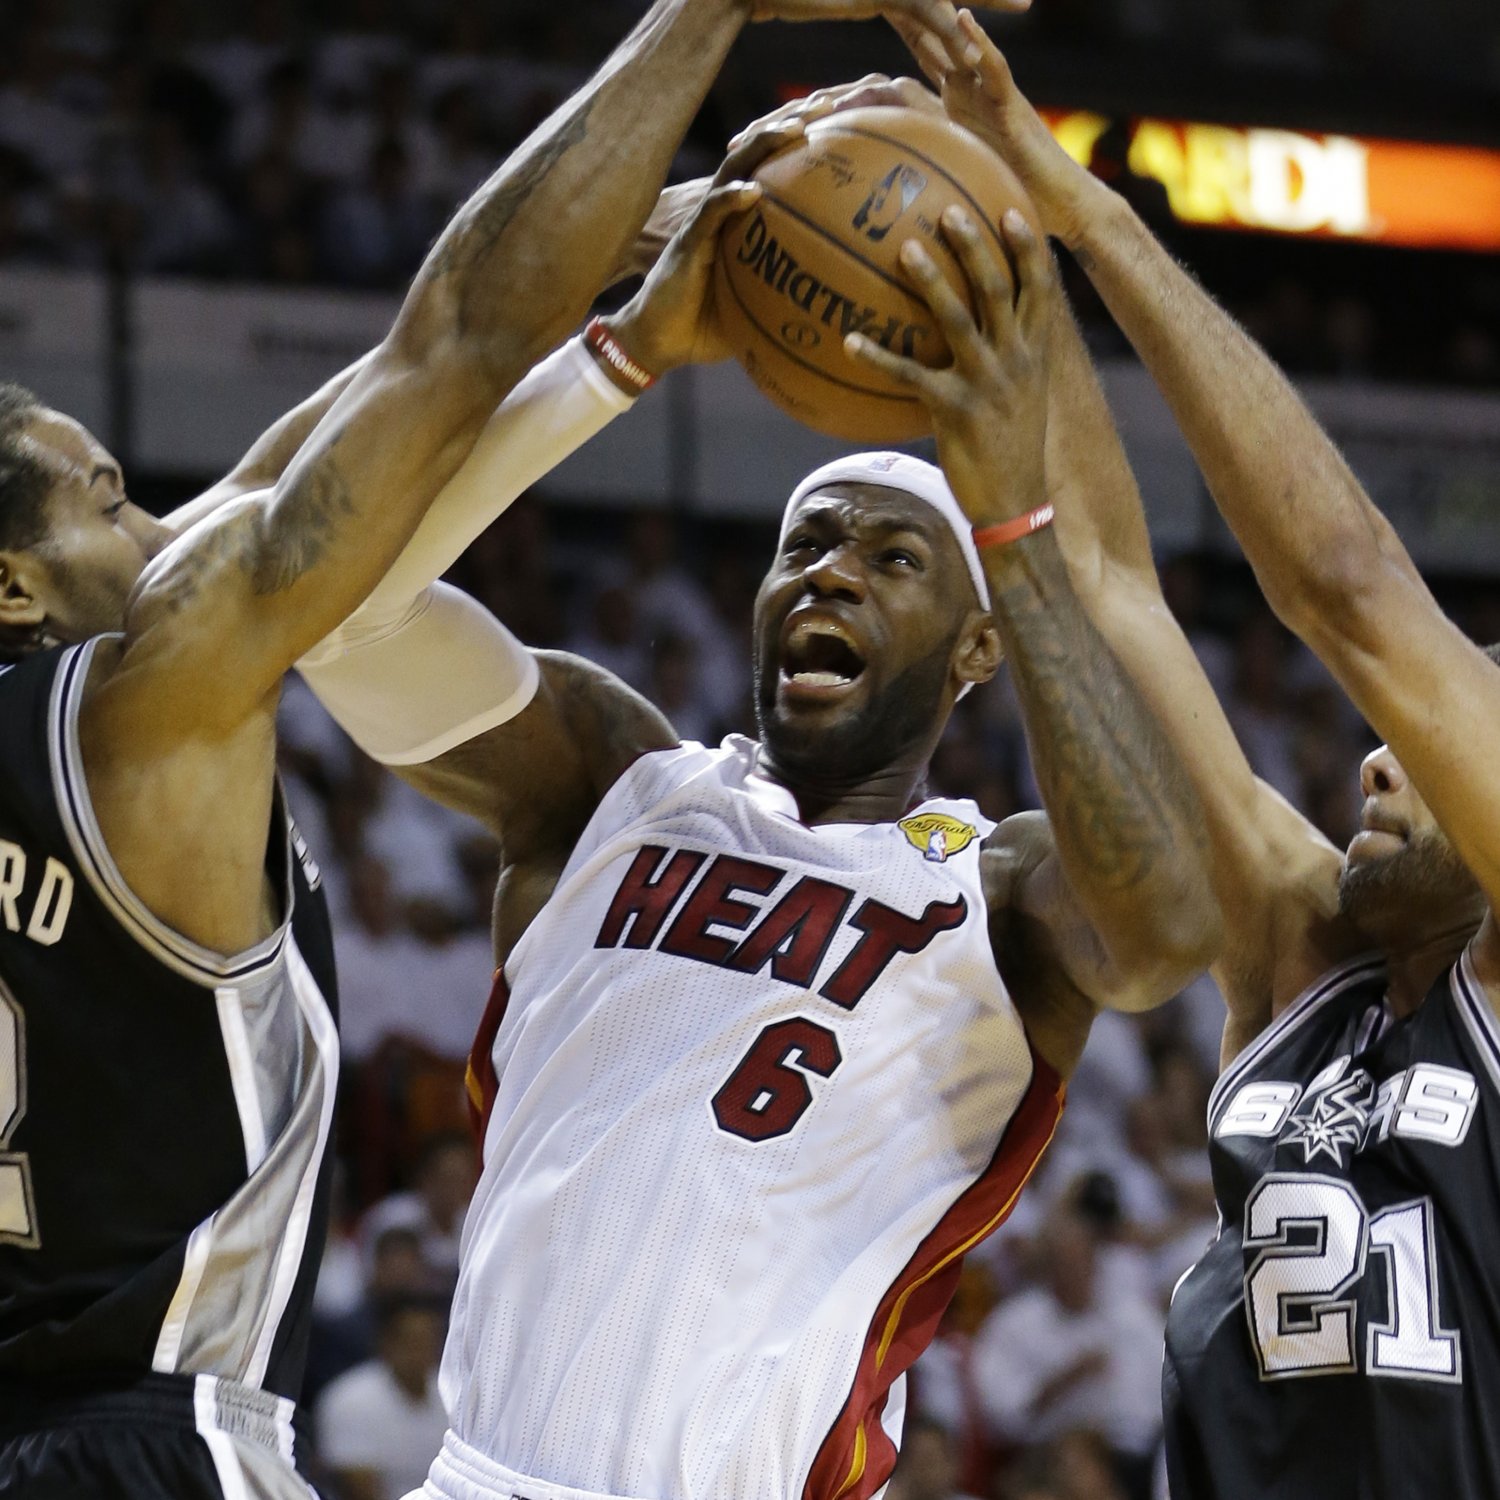 NBA Finals Schedule 2014: When and Where to Watch Heat vs. Spurs Game 5 | Bleacher Report